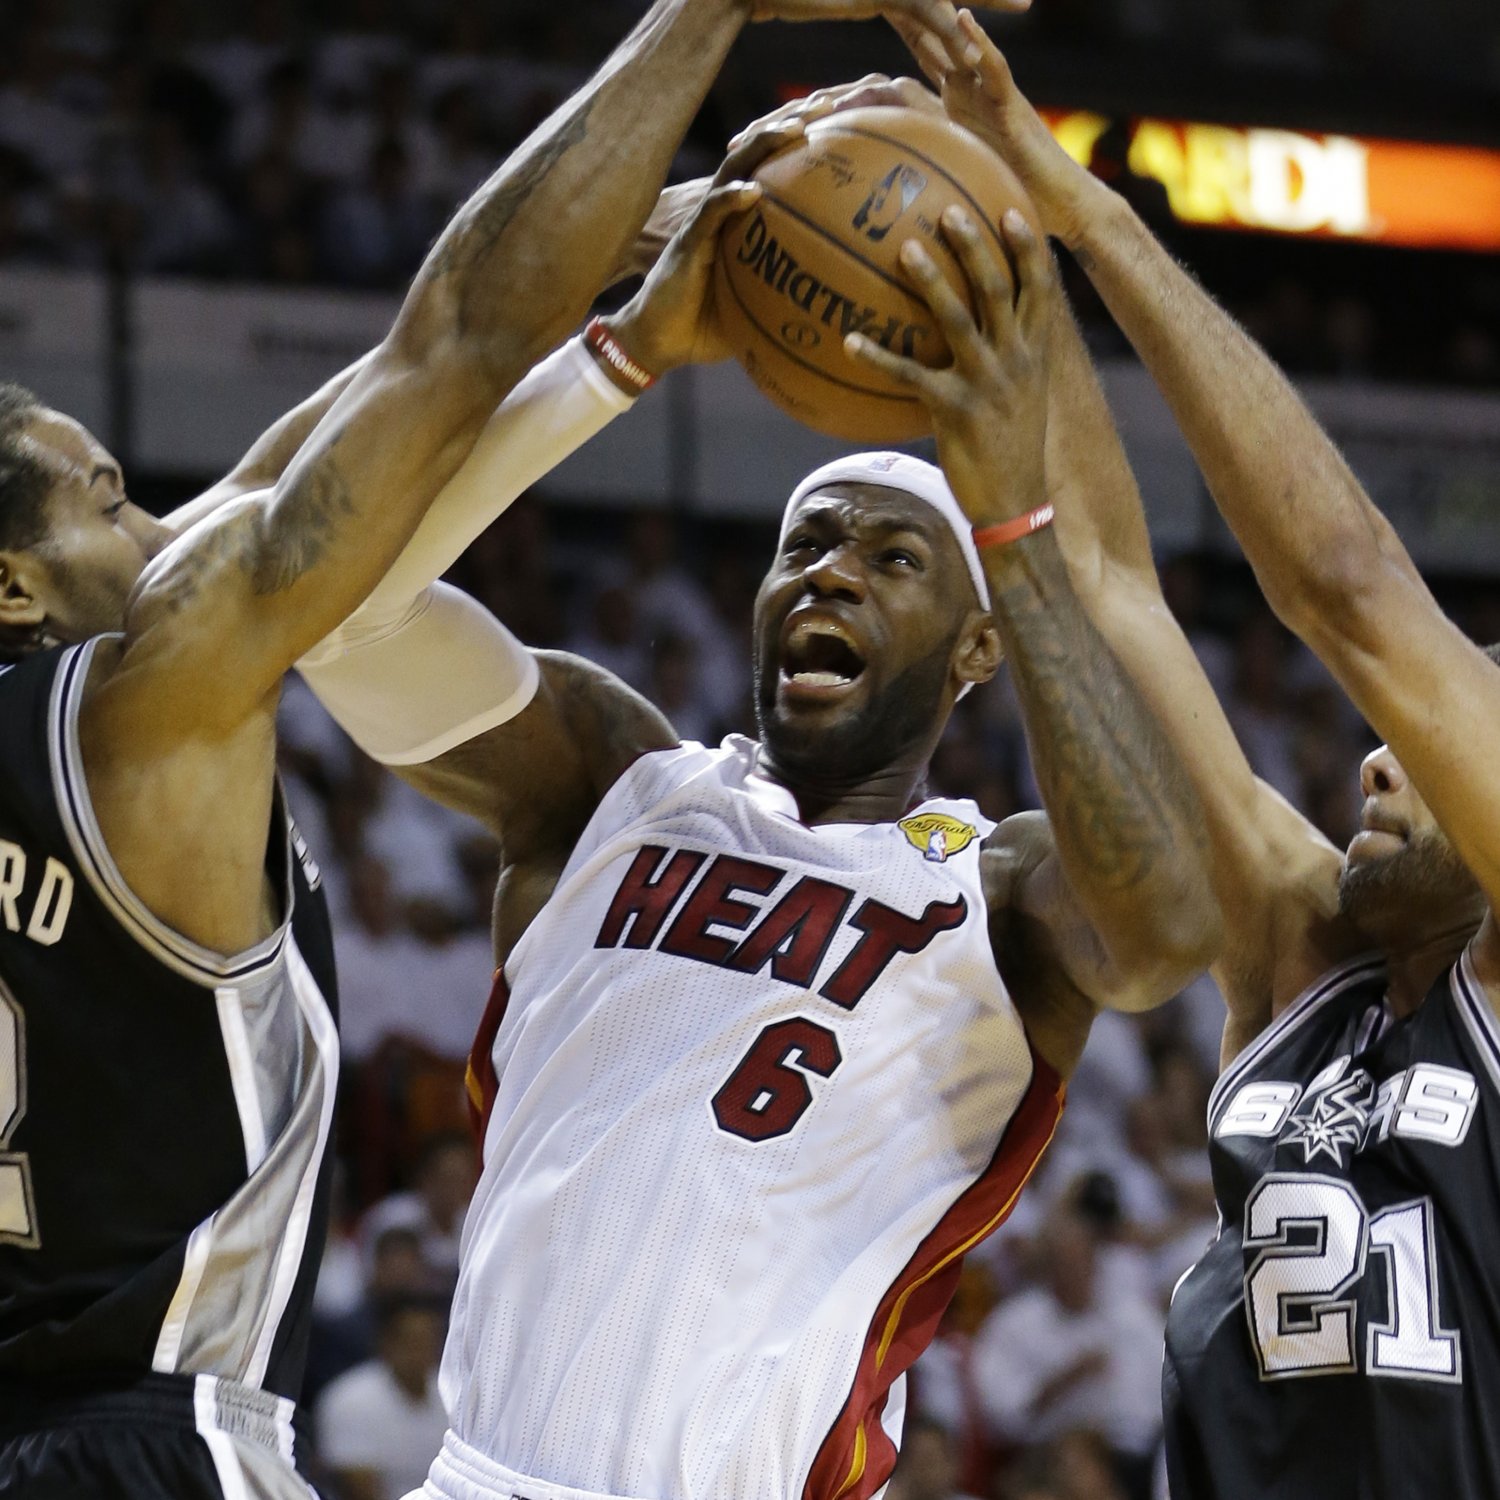 NBA Finals Schedule 2014: When and Where to Watch Heat vs. Spurs Game 5 | Bleacher Report